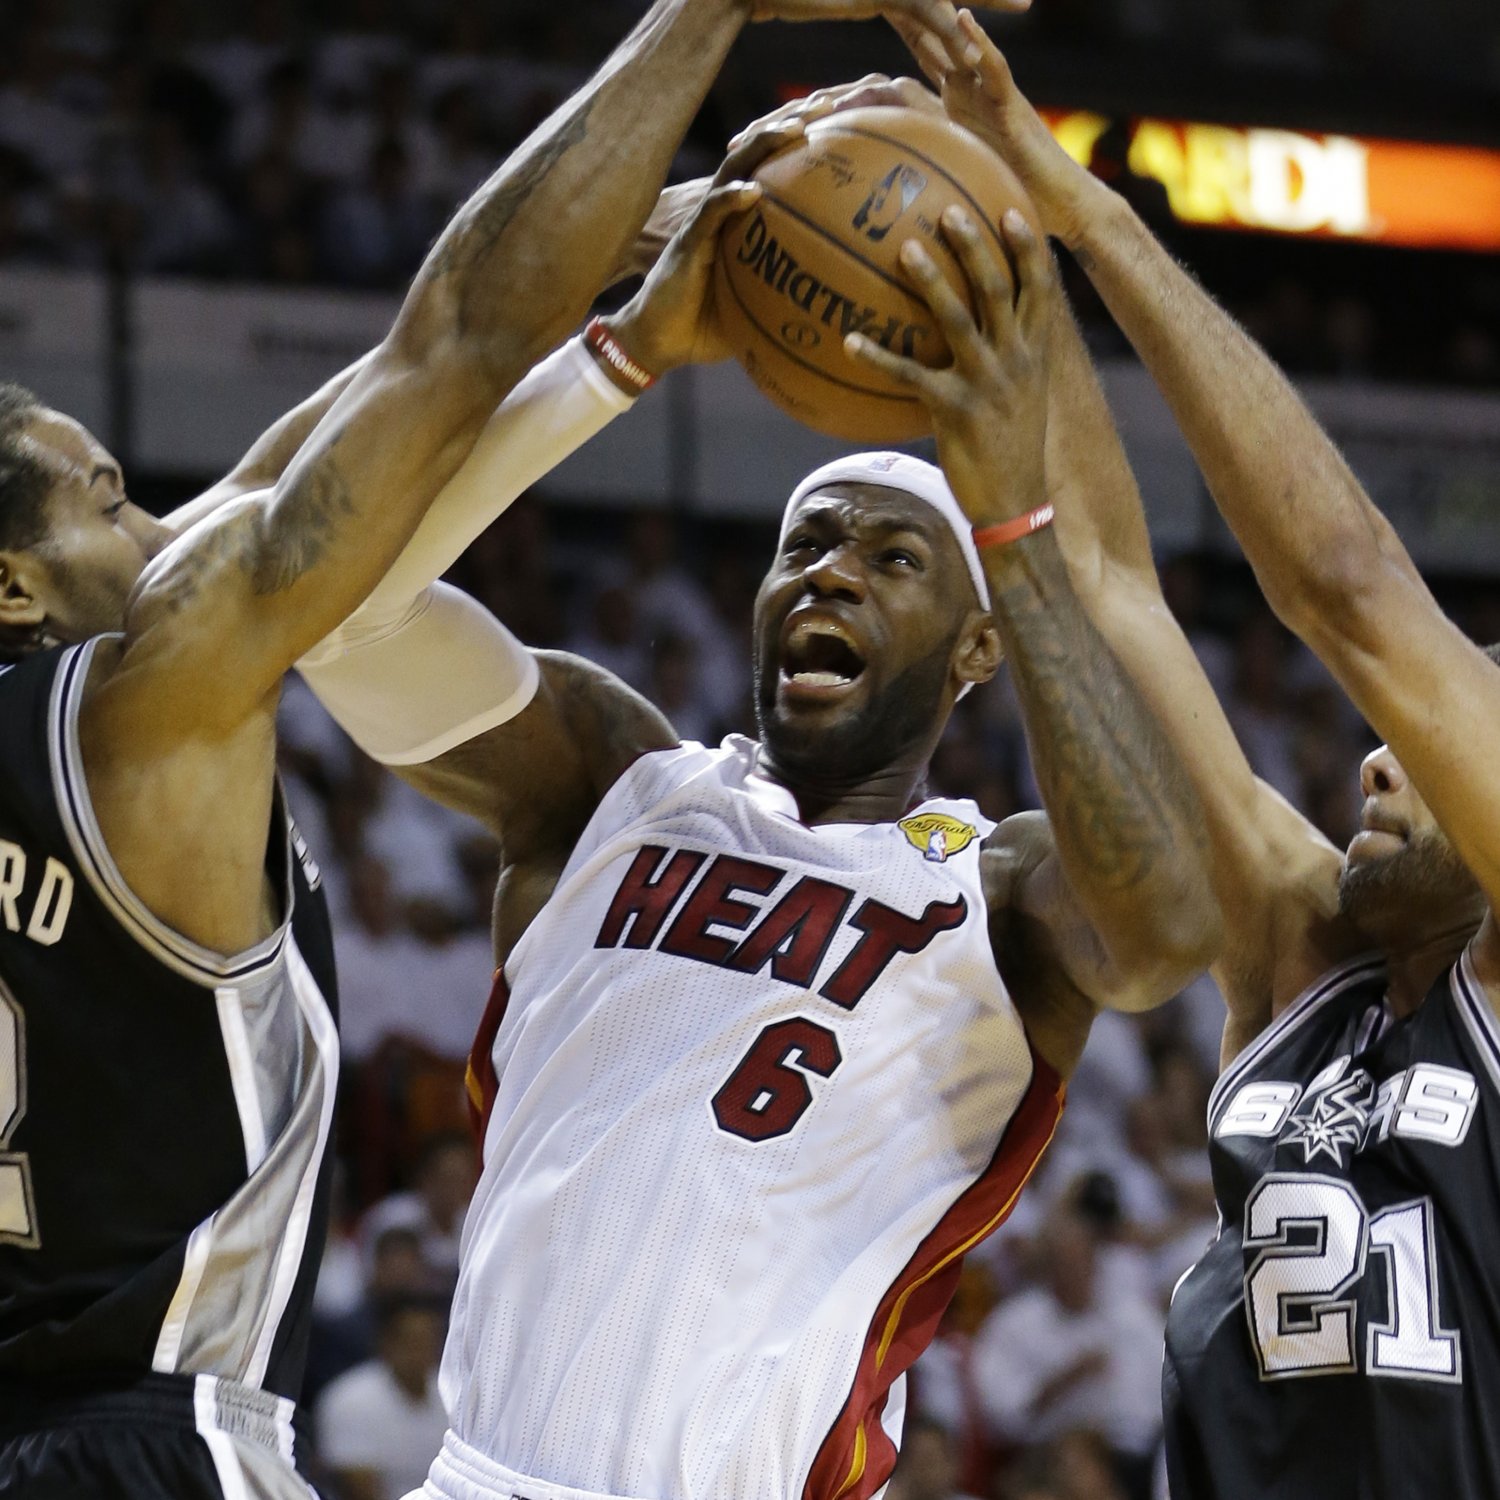 NBA Finals Schedule 2014: When and Where to Watch Heat vs. Spurs Game 5 | Bleacher Report